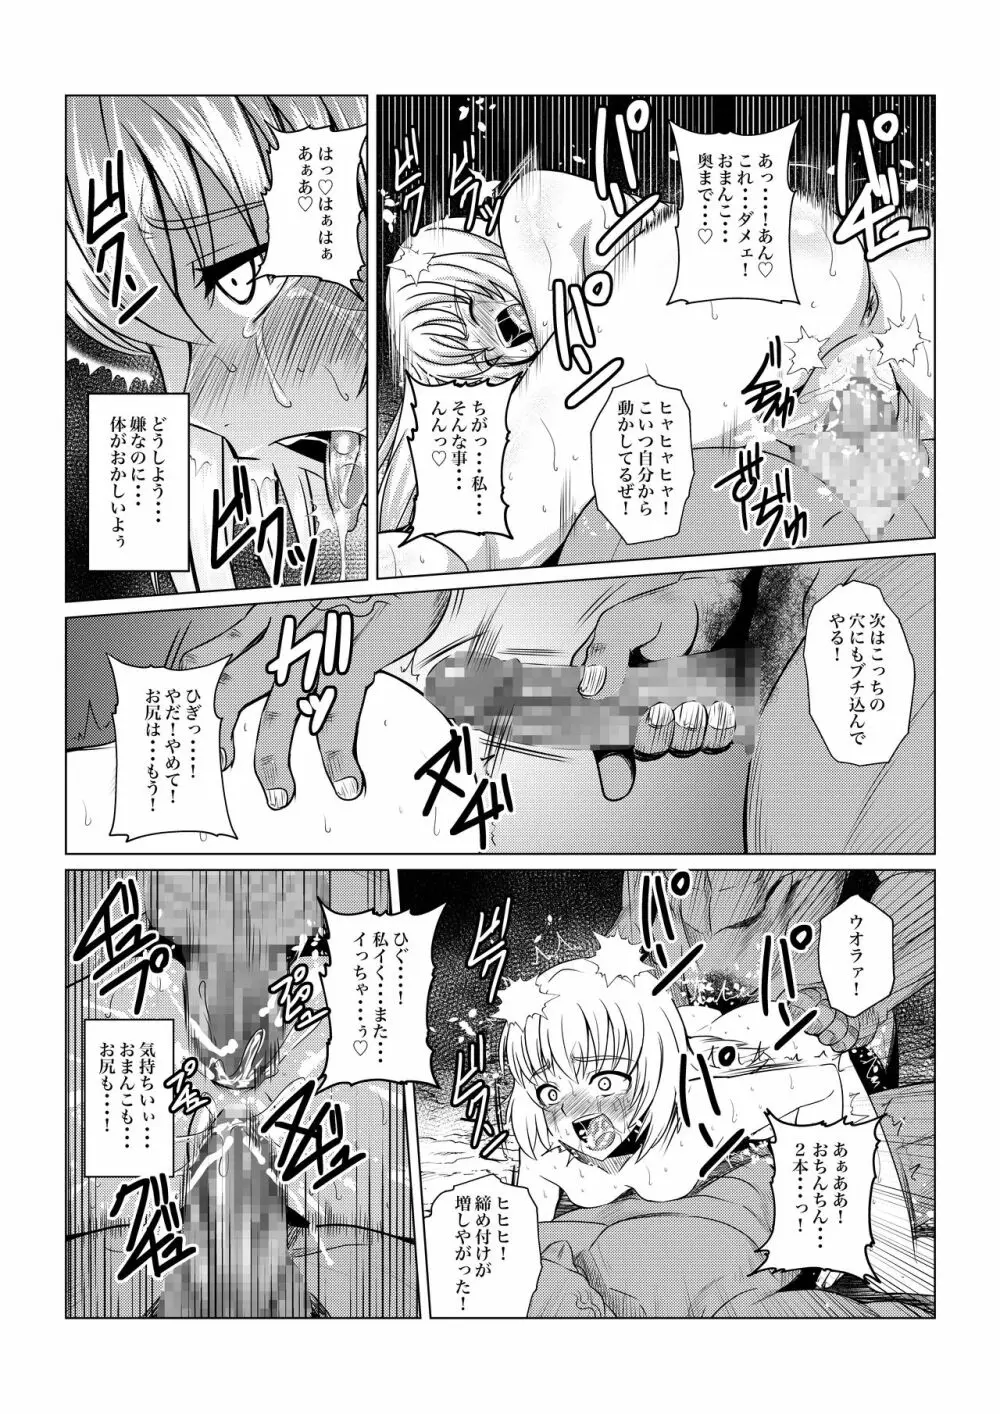 Tales Of DarkSide〜三散華〜 - page7